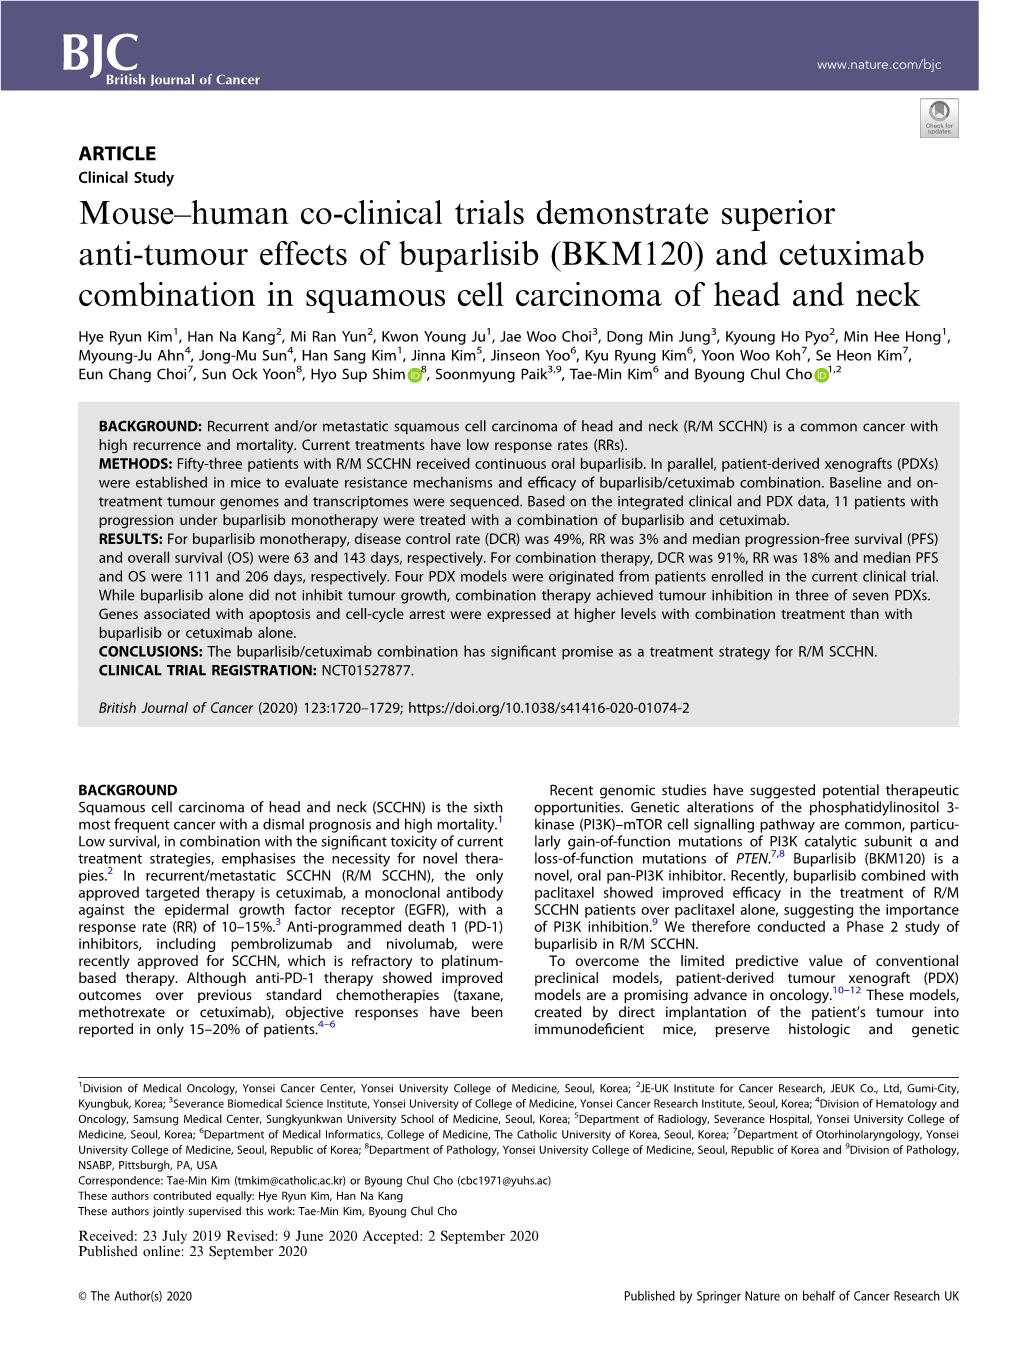 Human Co-Clinical Trials Demonstrate Superior Anti-Tumour Effects of Buparlisib (BKM120) and Cetuximab Combination in Squamous Cell Carcinoma of Head and Neck